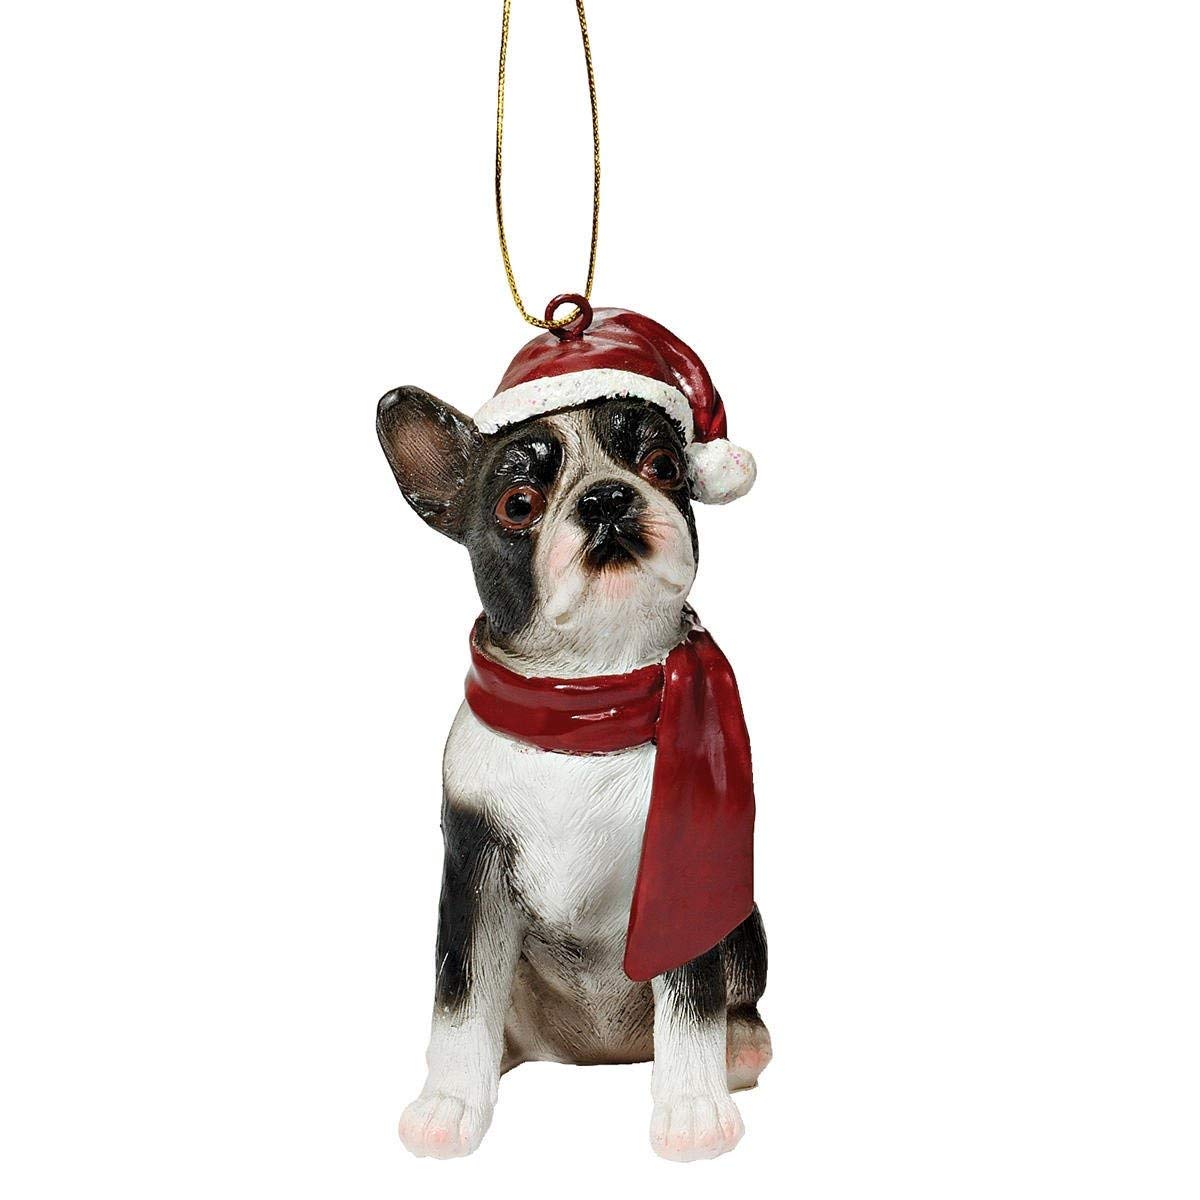 Boston Terrier wearing ref scarf and christmas hat ornamental gift